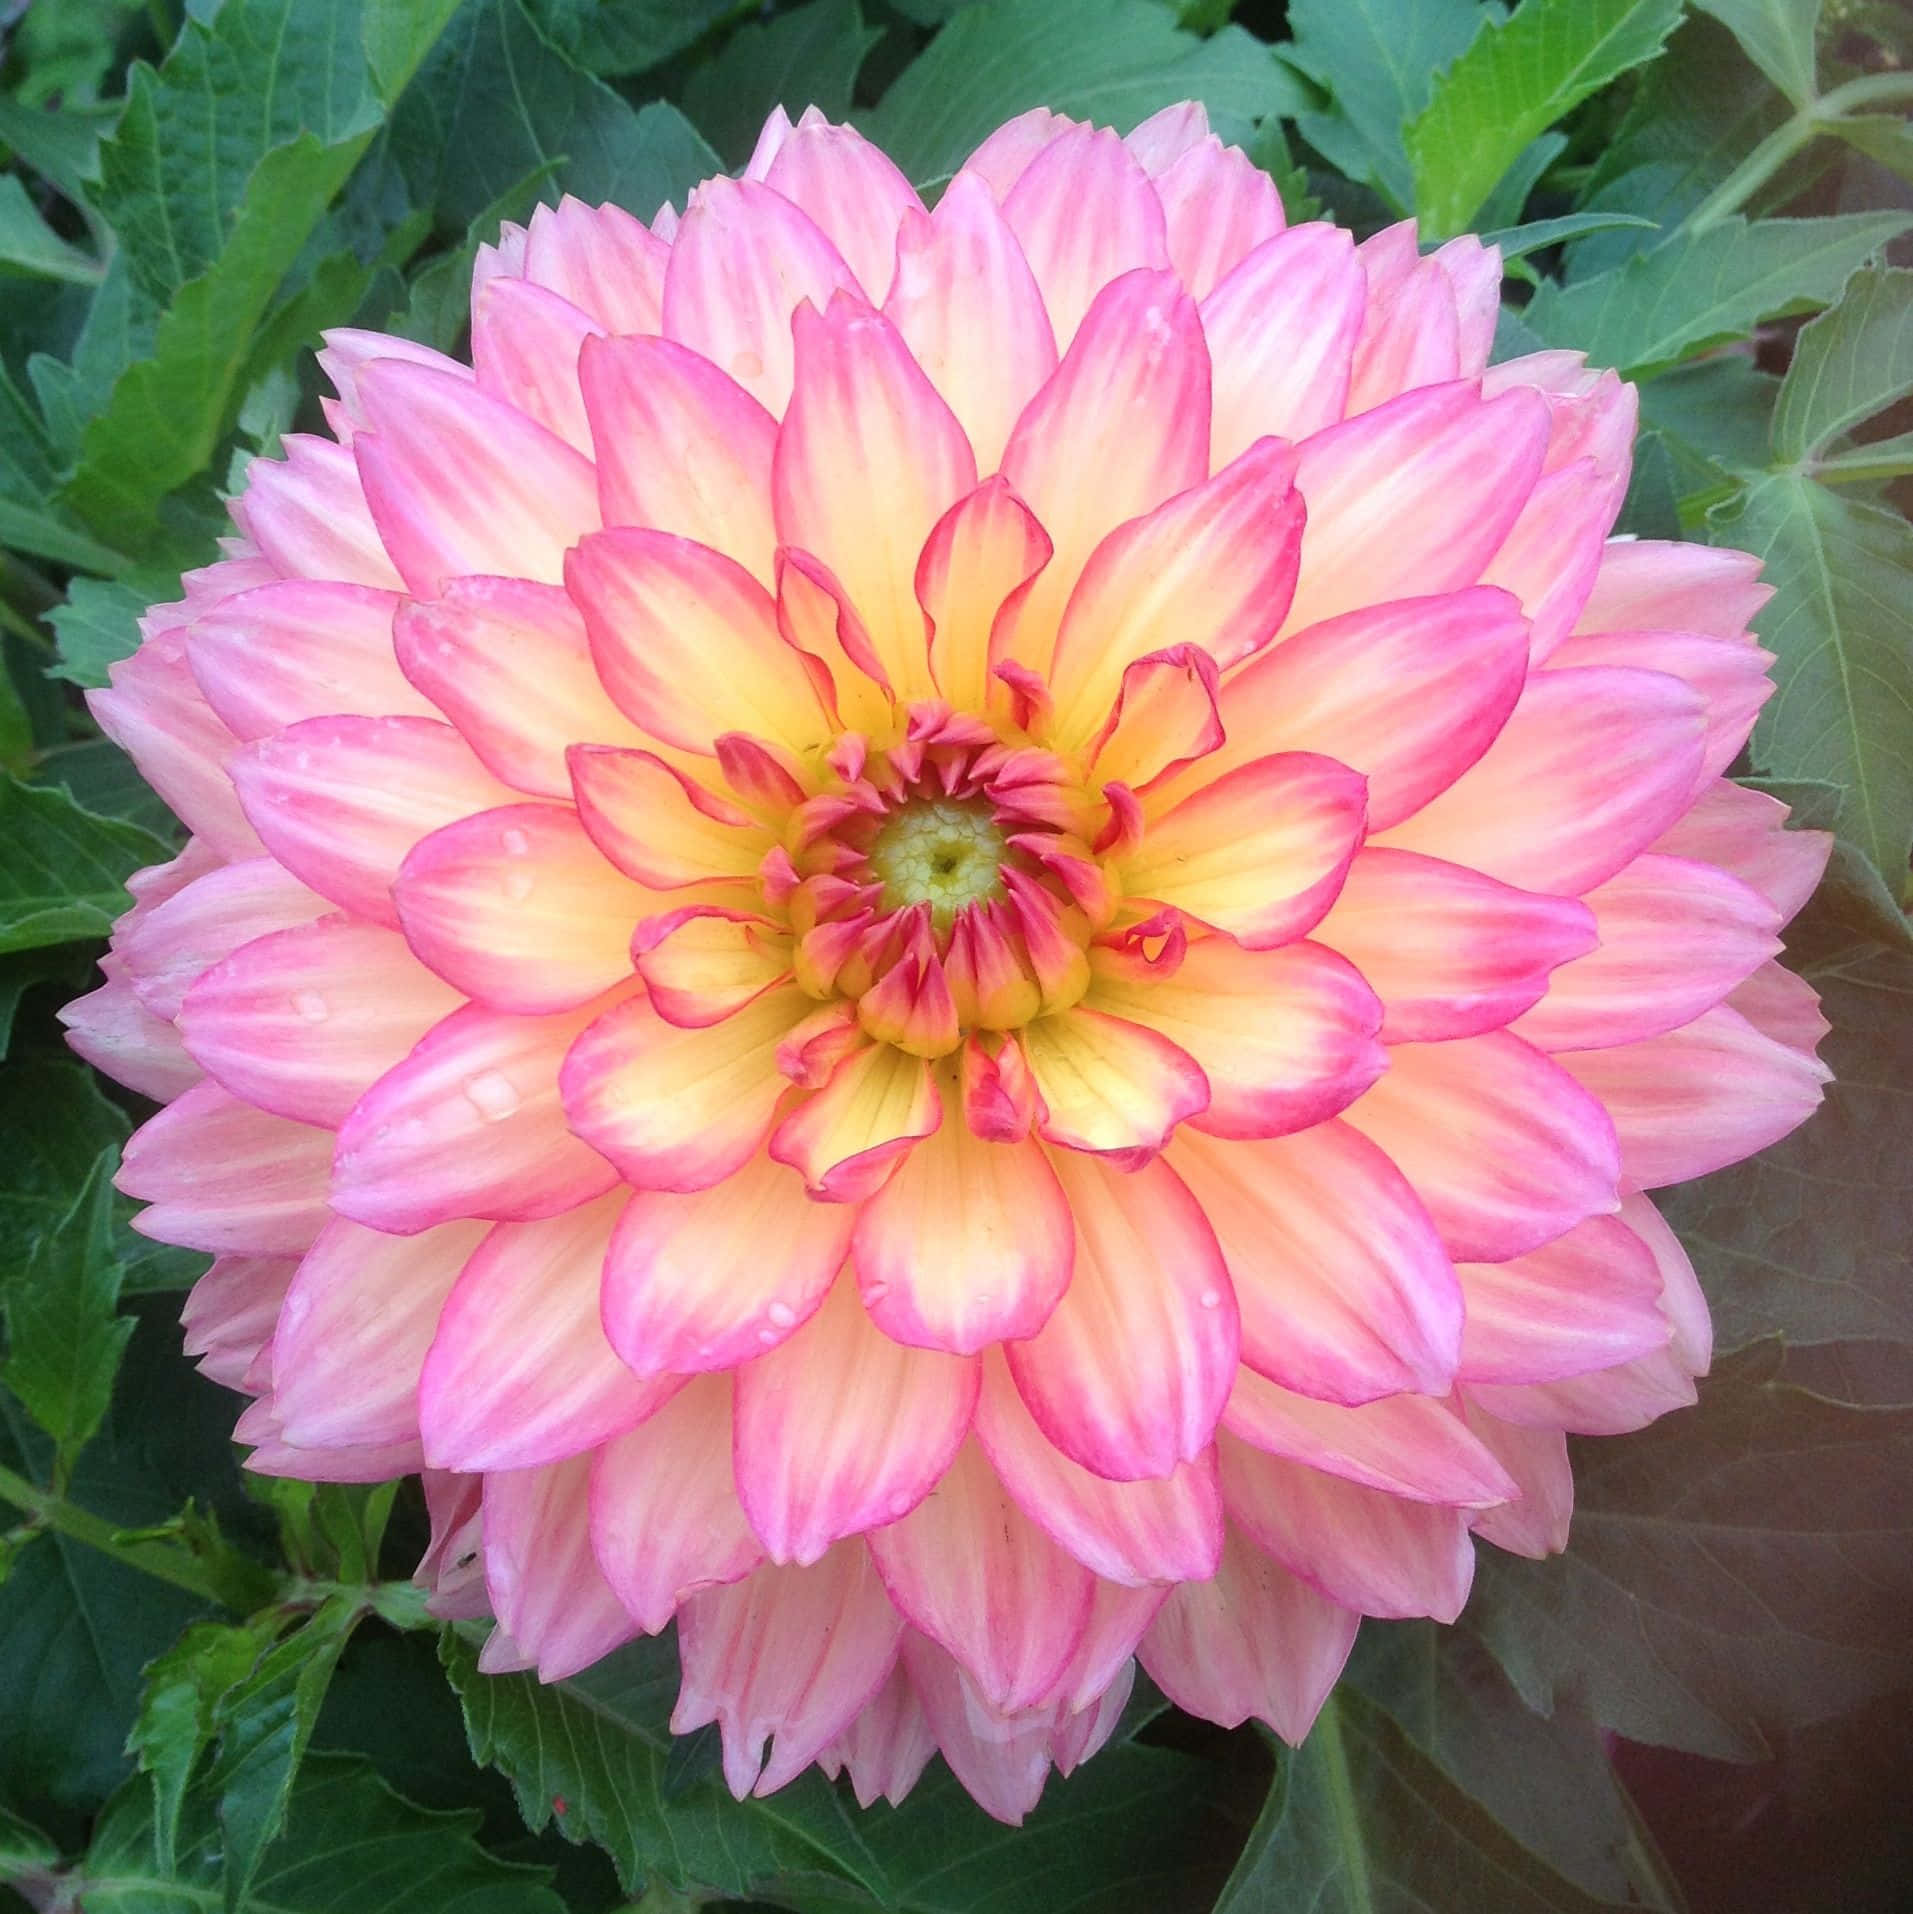 A Pink And Yellow Dahlia Flower In A Garden